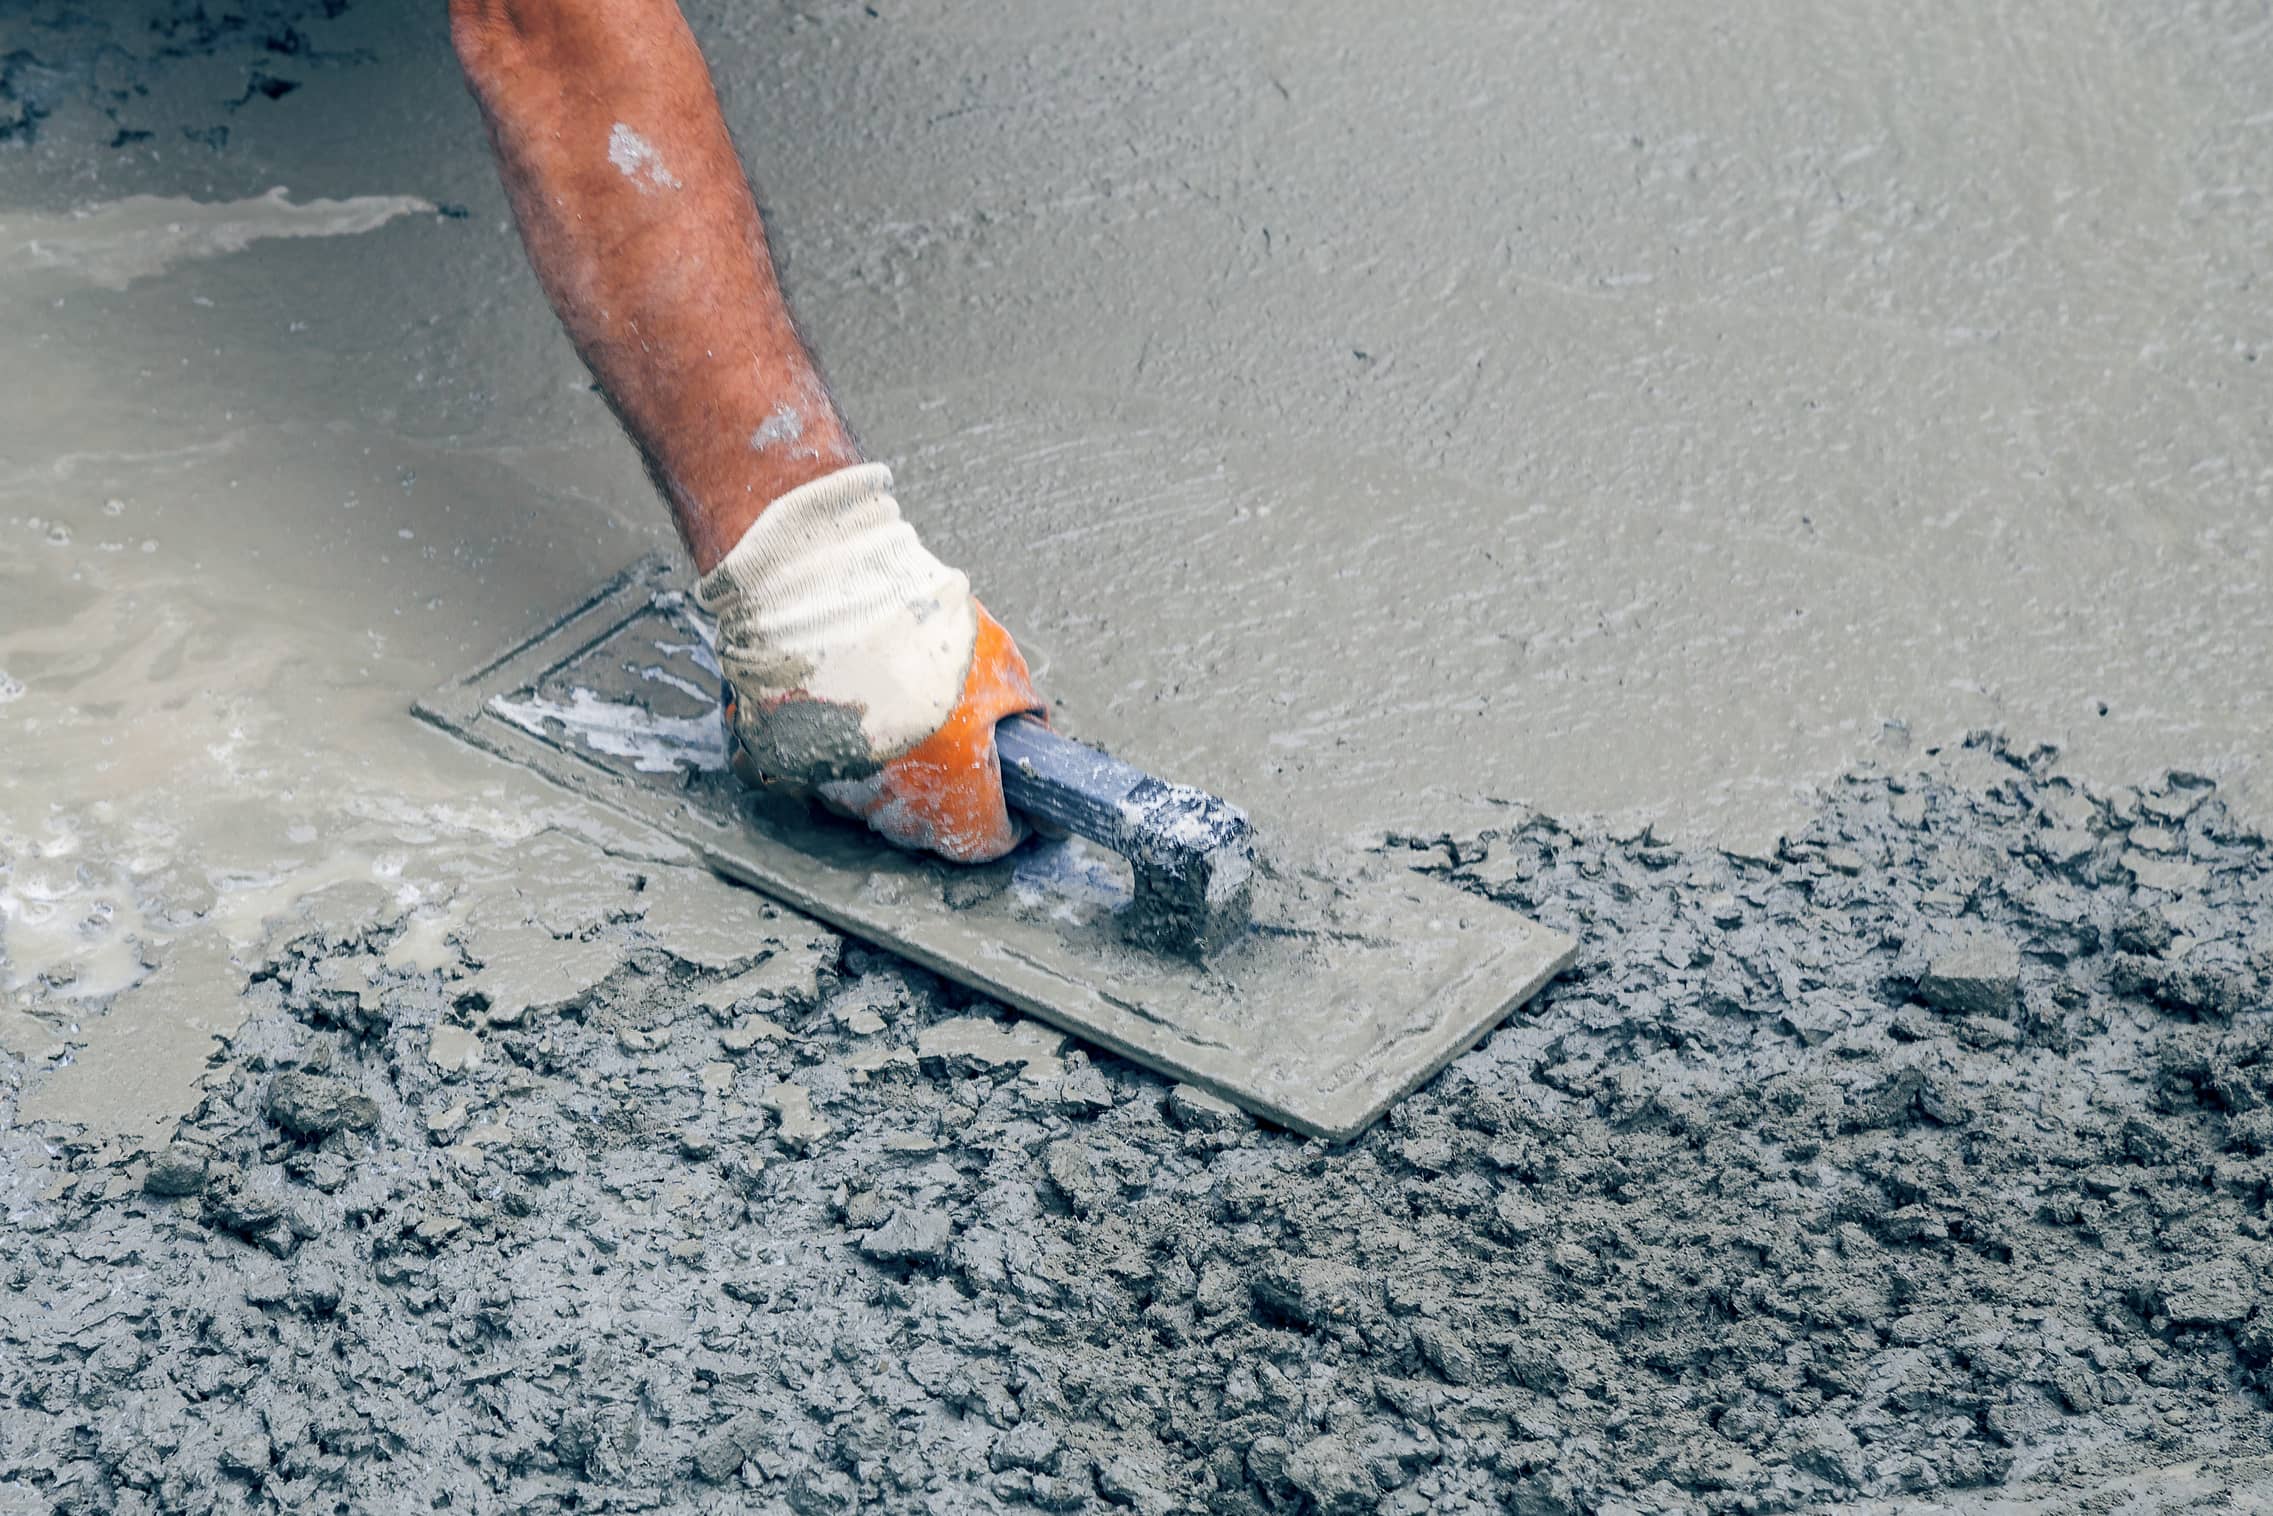 This is an image of a contractor smoothing out wet concrete with a trowel.